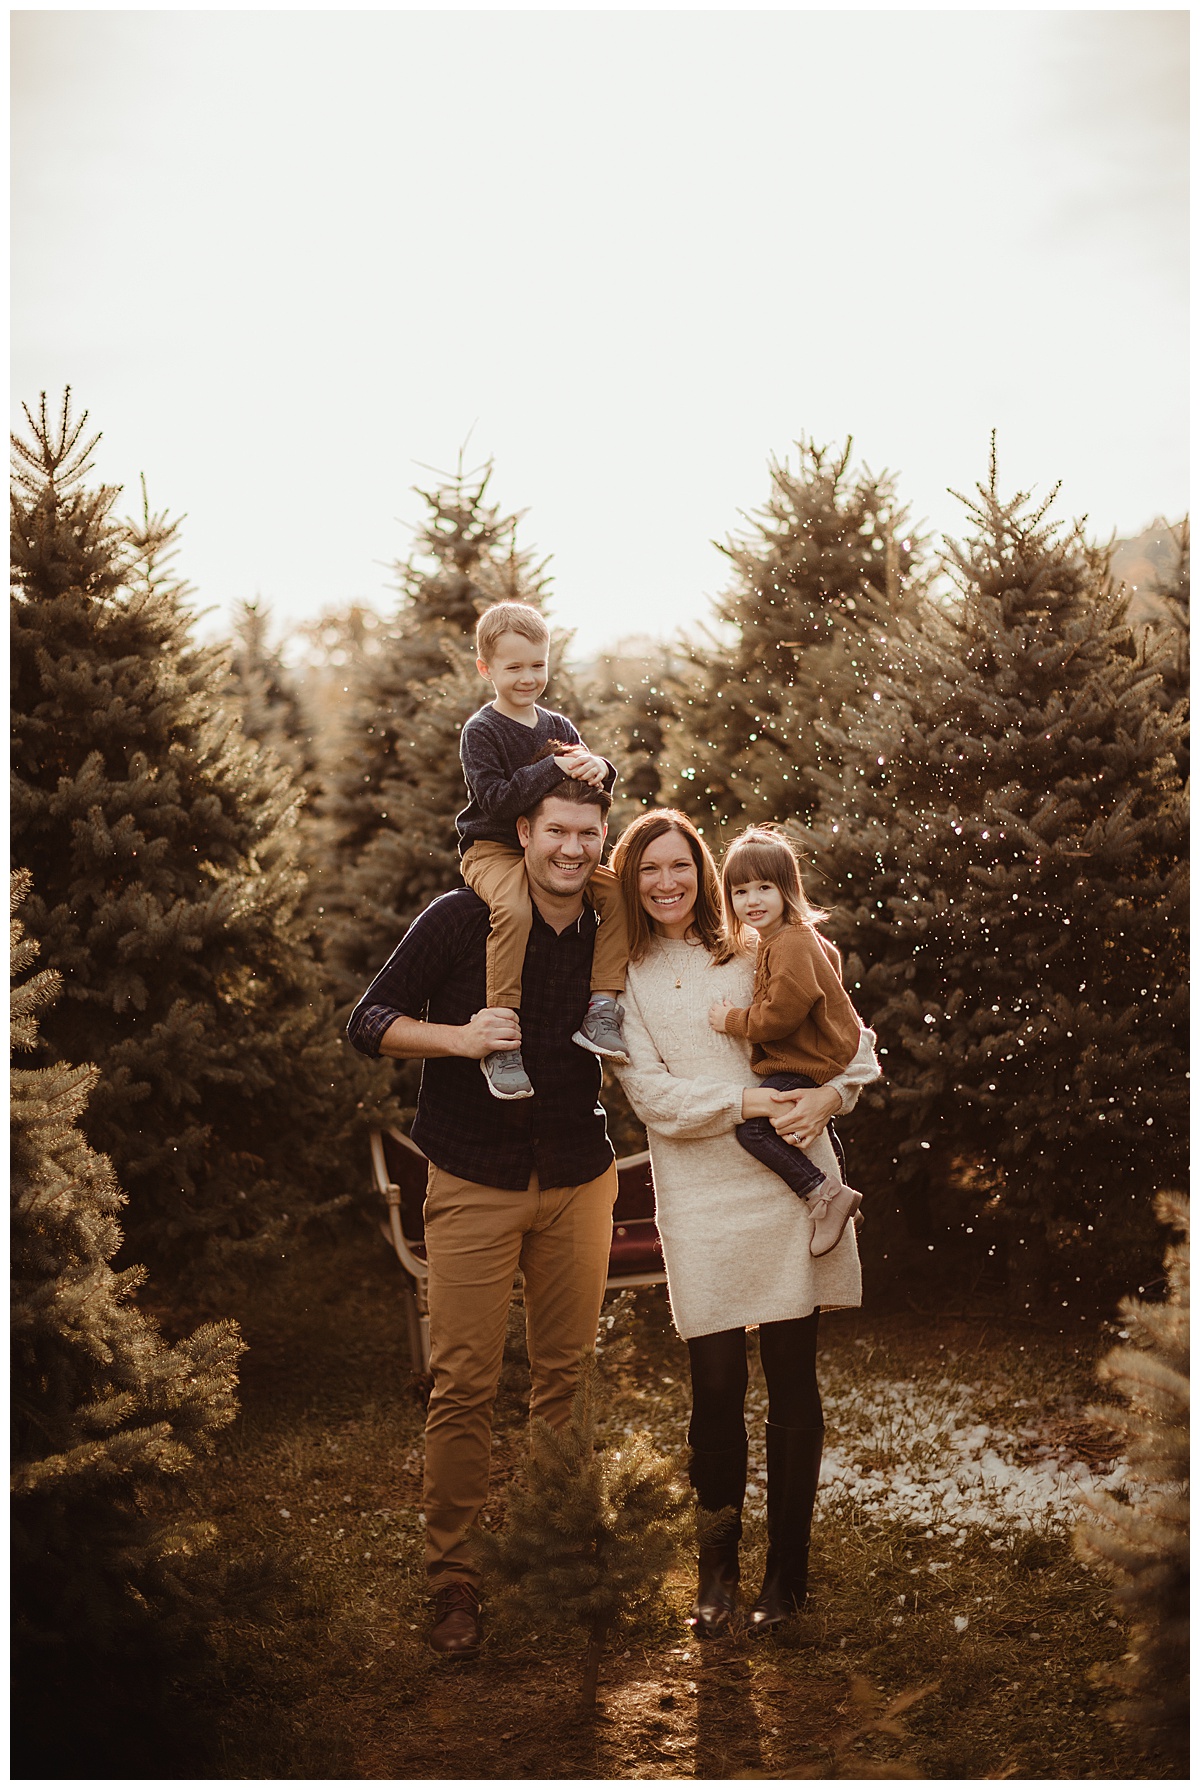 Family standing in front of trees by Norma Fayak Photography